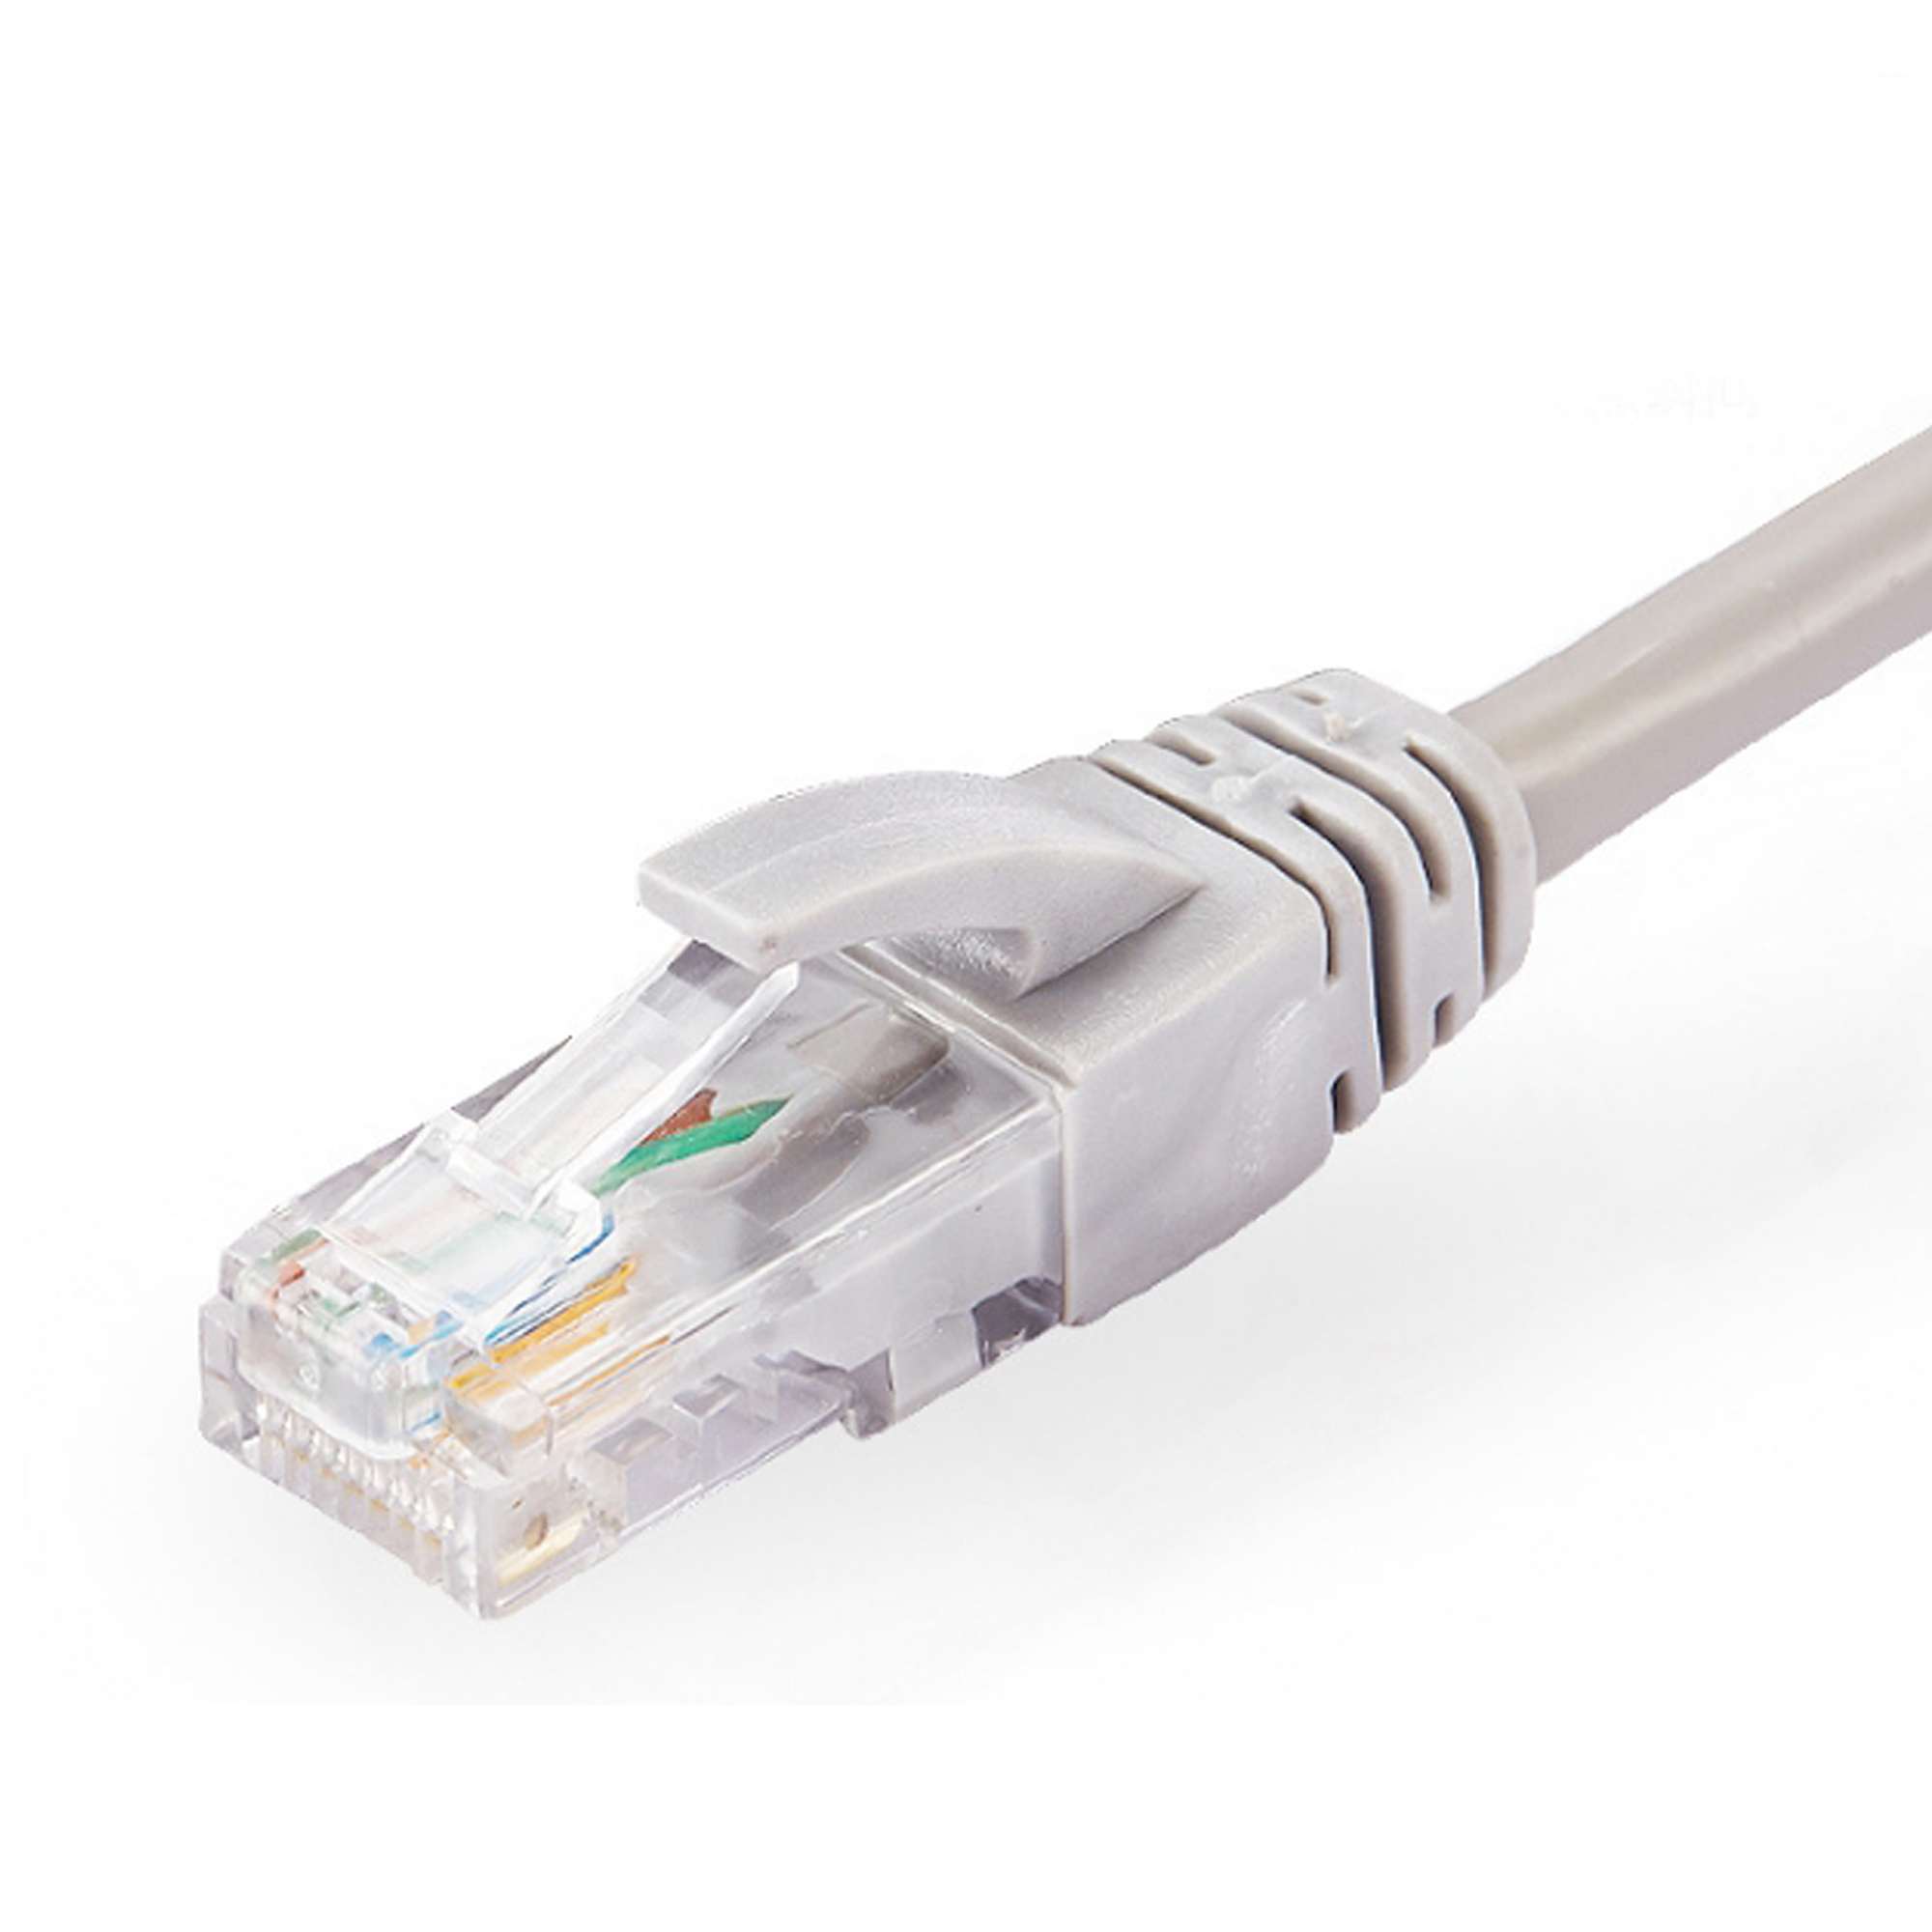 Cat 6 UTP Patch cord 24AWG Stranded Conductor BC LSZH 1/2/3/5......Meters